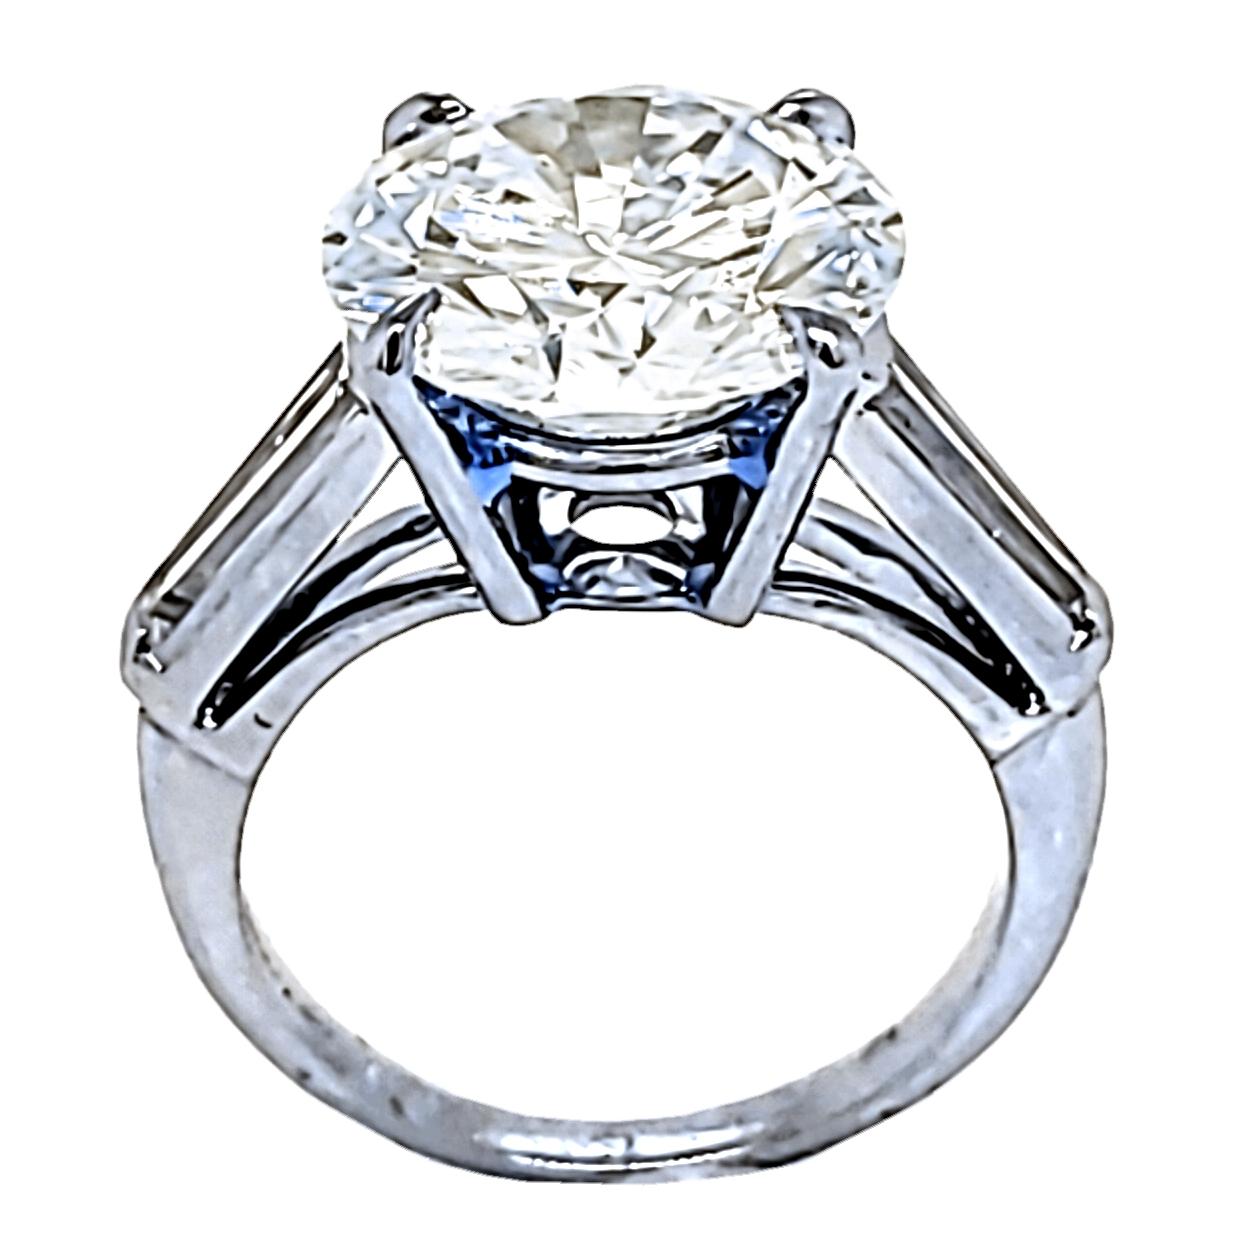 A shiny 4.64 Ct Round Brilliant K/VS1 GIA Certified center Diamond set in a fine Platinum 3 Stone Engagement Ring with two Long Tapered Baguette diamonds on the side. Total diamond weight of 0.40 Ct. on the side. 

Center stone: 4.64 Ct GIA